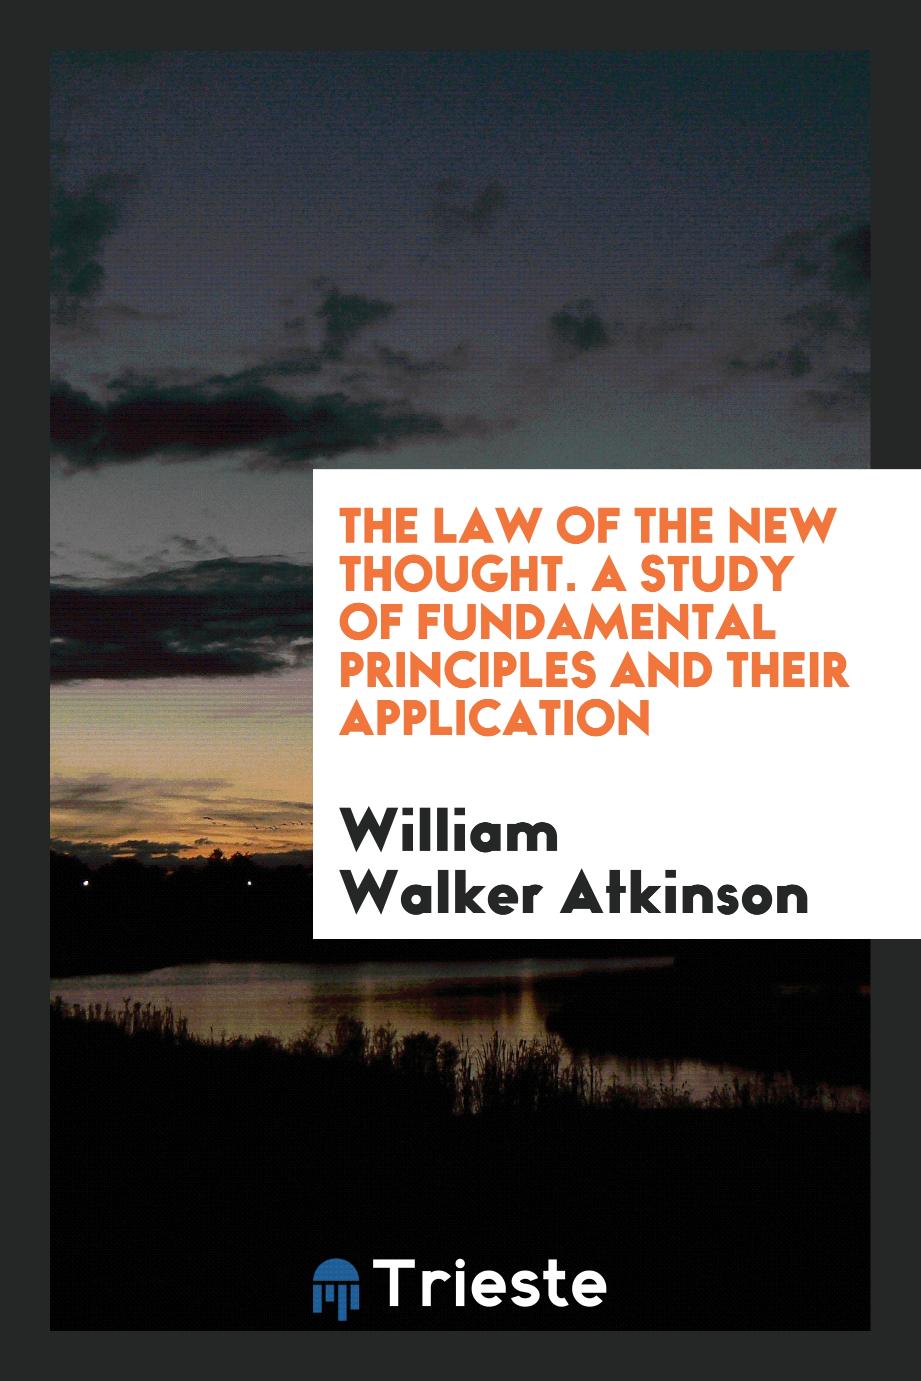 The Law of the New Thought. A Study of Fundamental Principles and Their Application